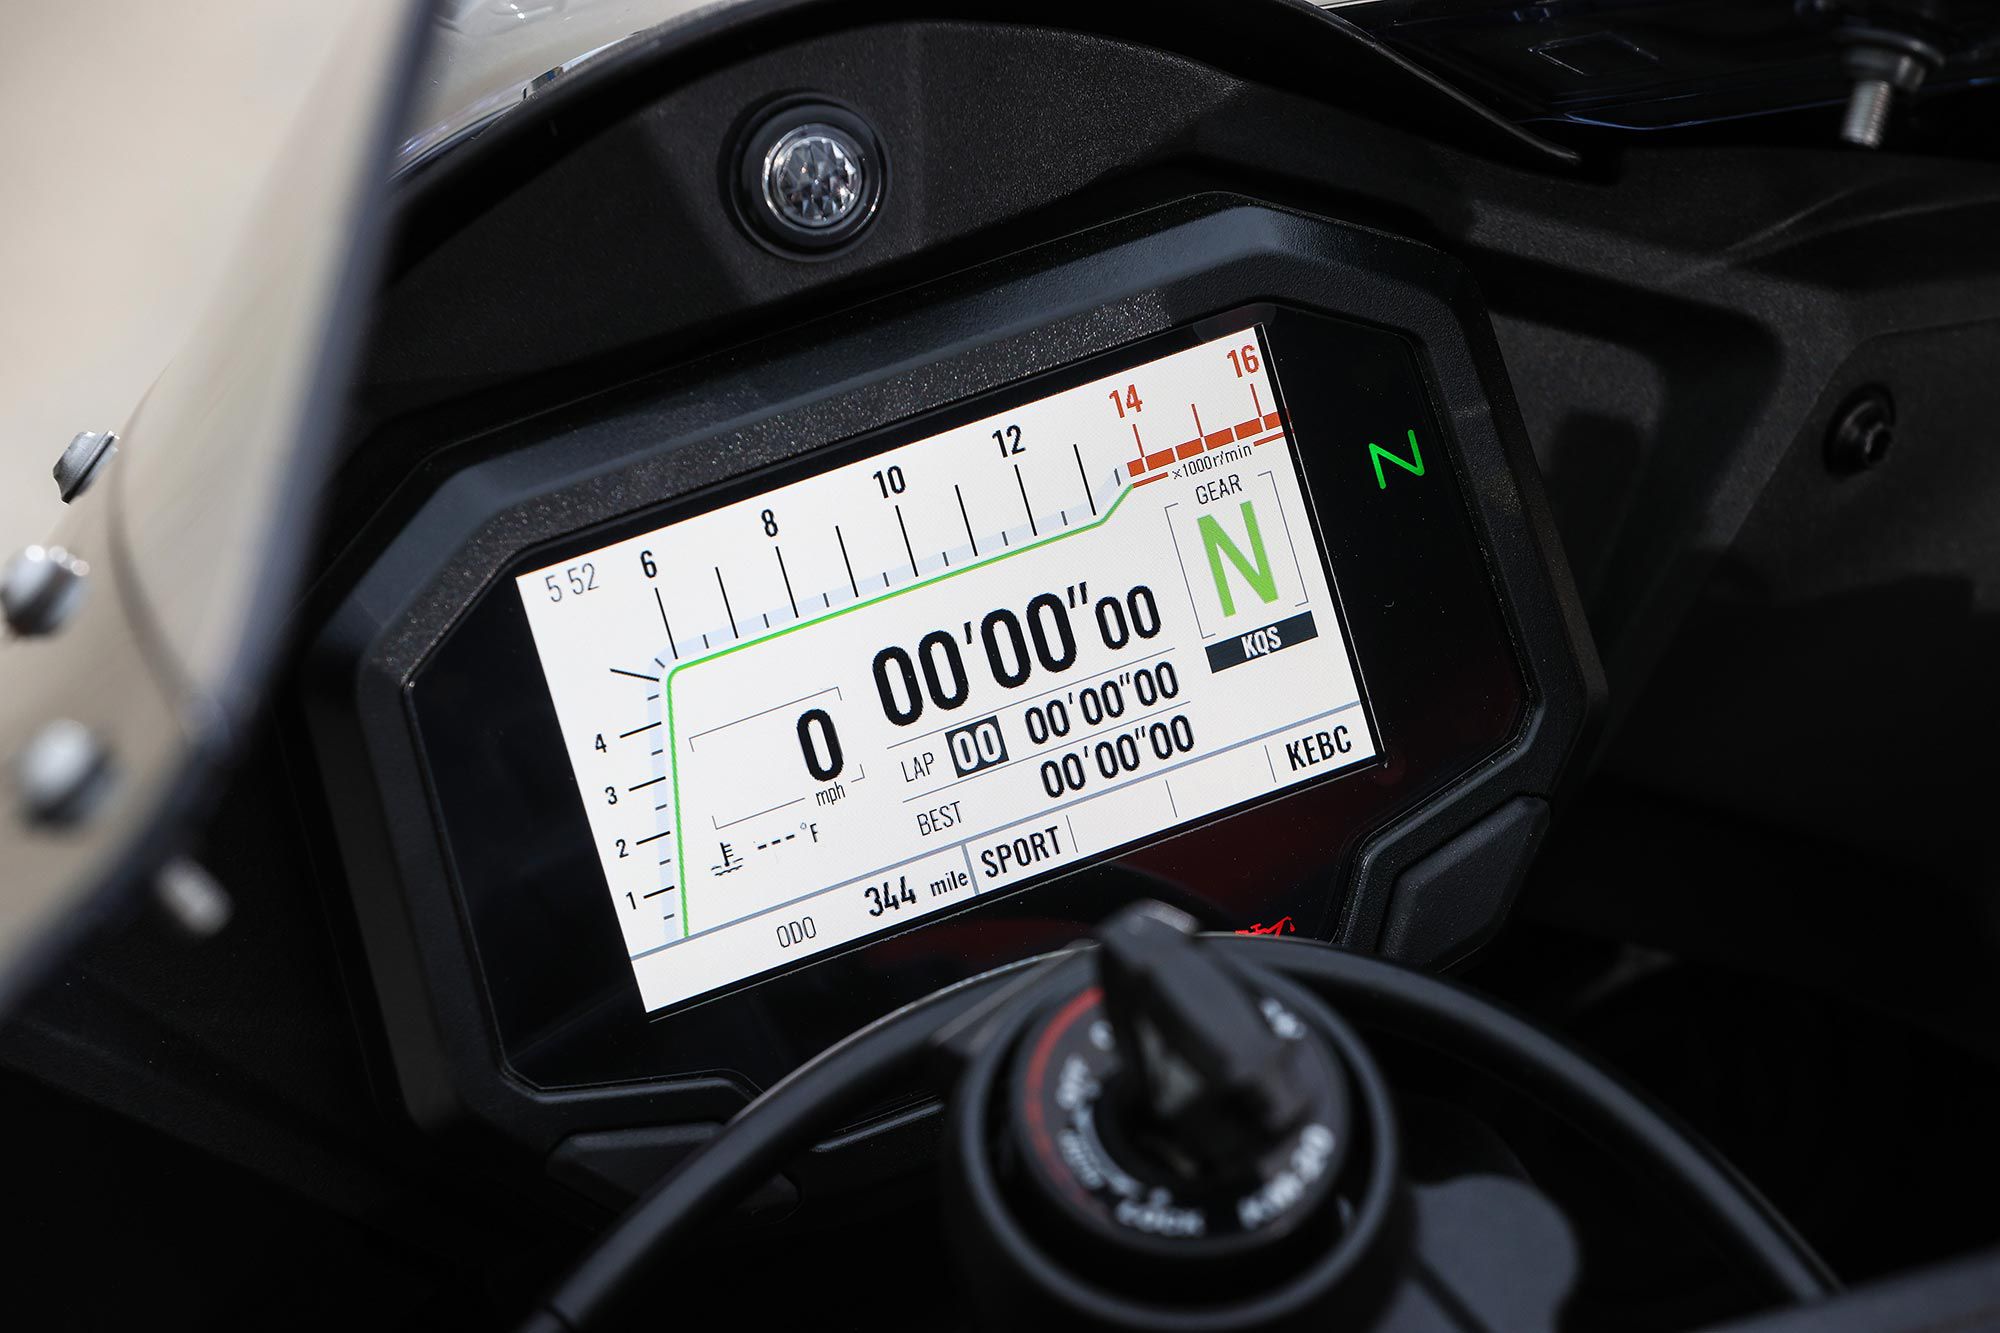 This 4.3-inch TFT display is a long-overdue replacement of the outgoing LCD tachometer. A lap-time function is activated via switch gear on the left handlebar.